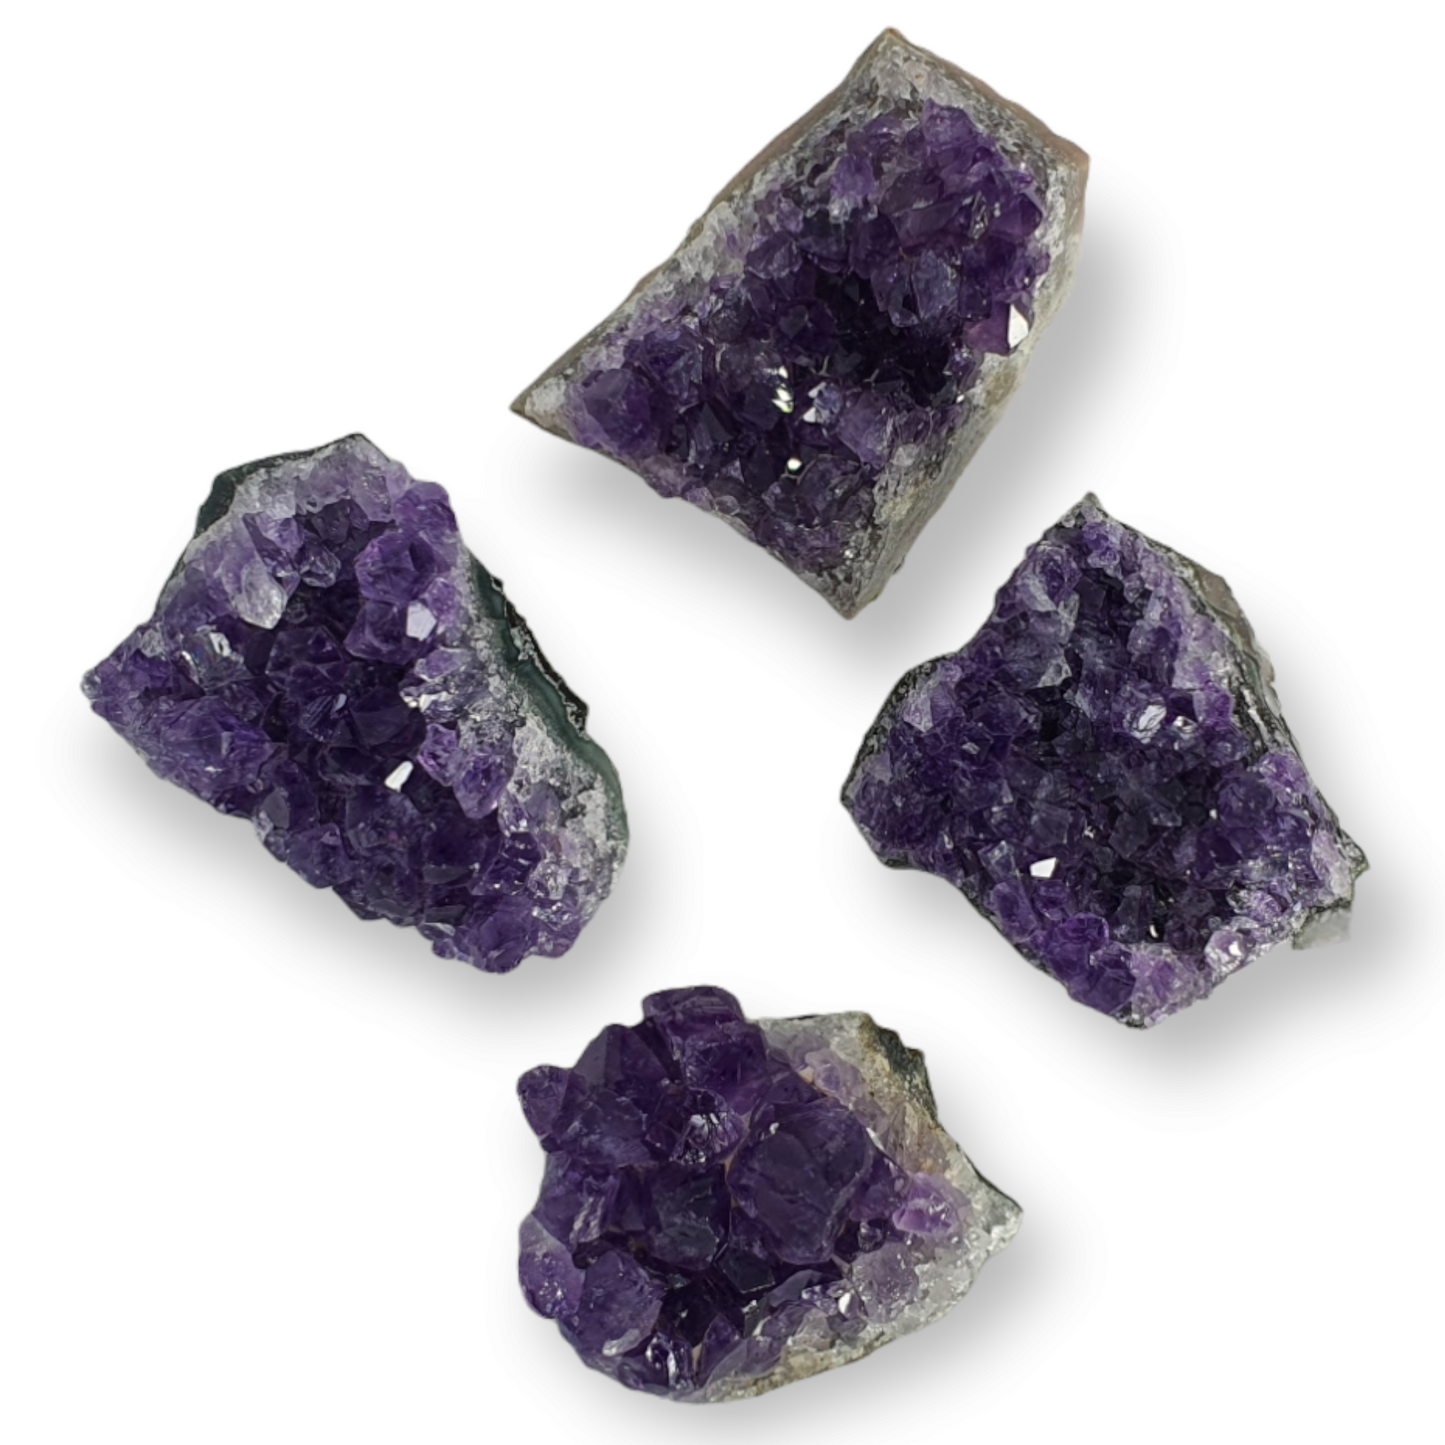 Crystals - Amethyst (Small) Clusters